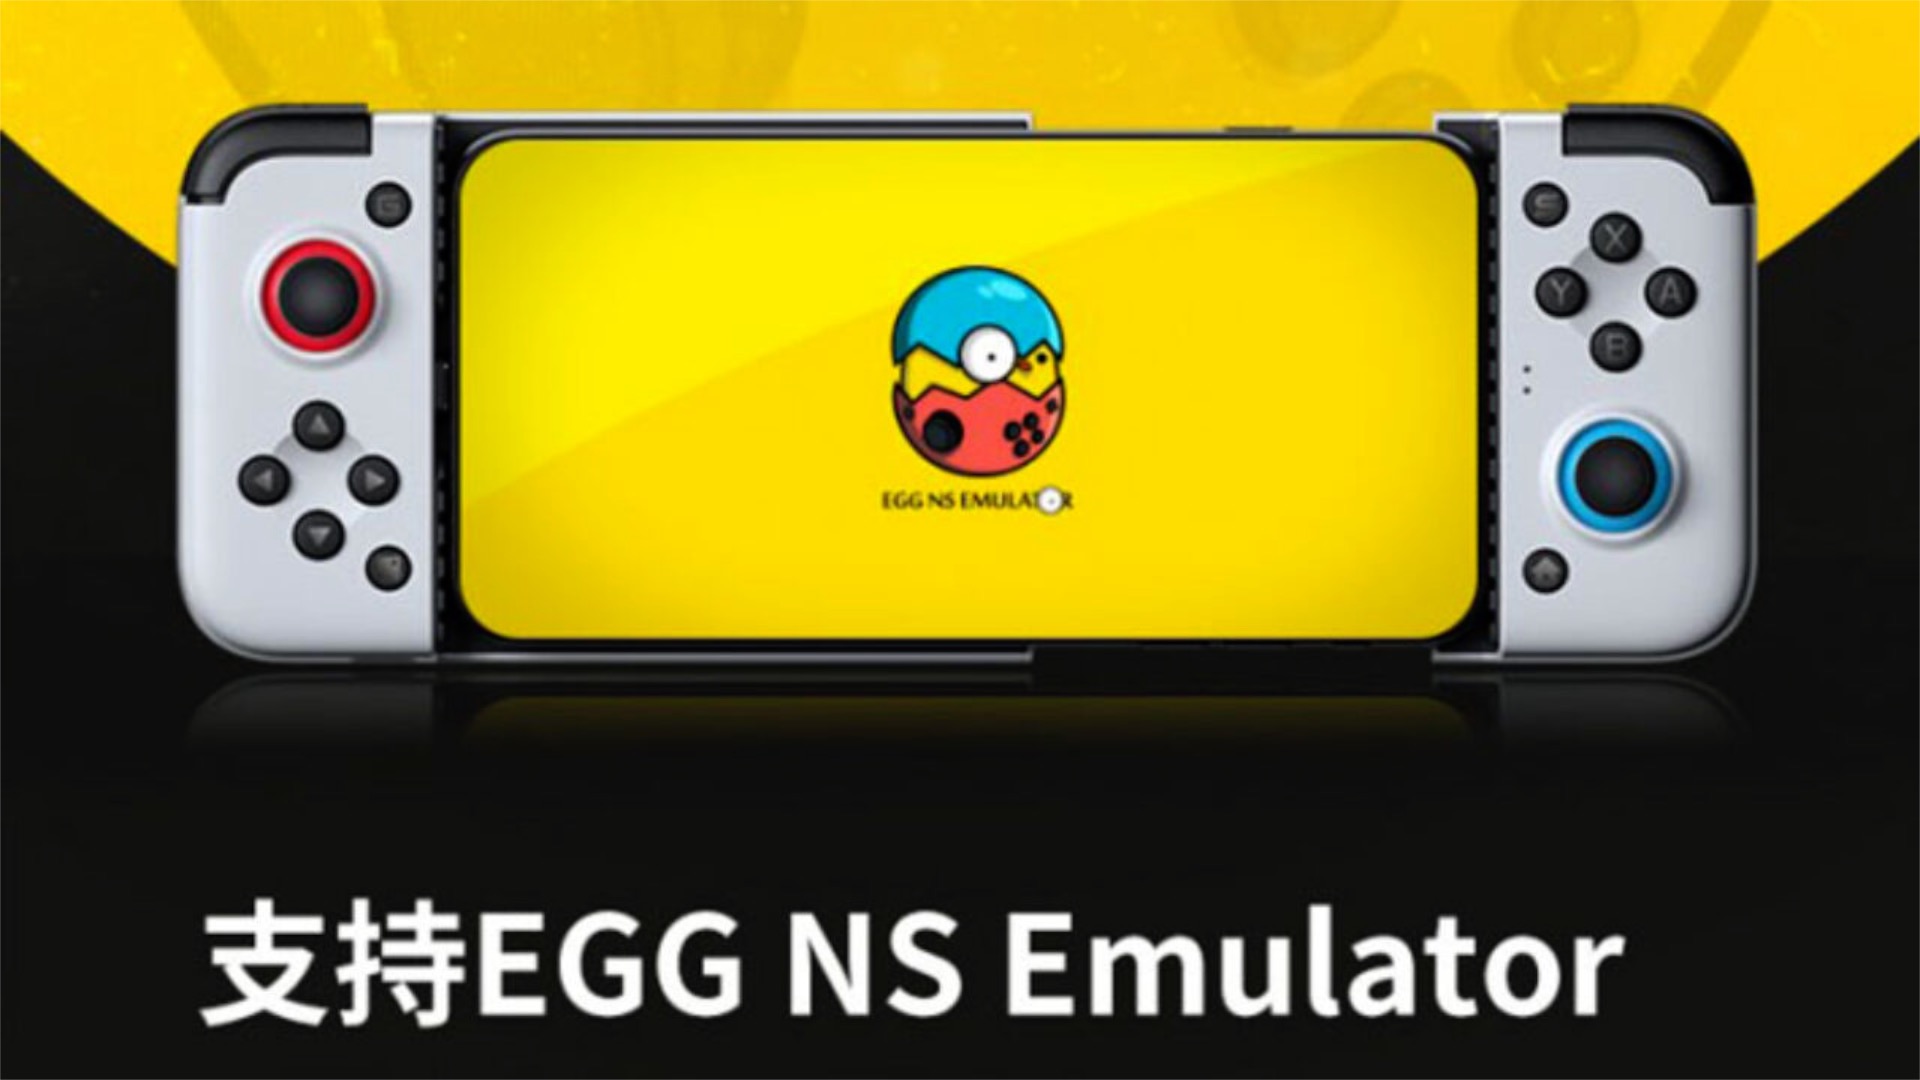 Your Xiaomi smartphone becomes a Nintendo Switch with Egg NS emulator -  GizChina.it